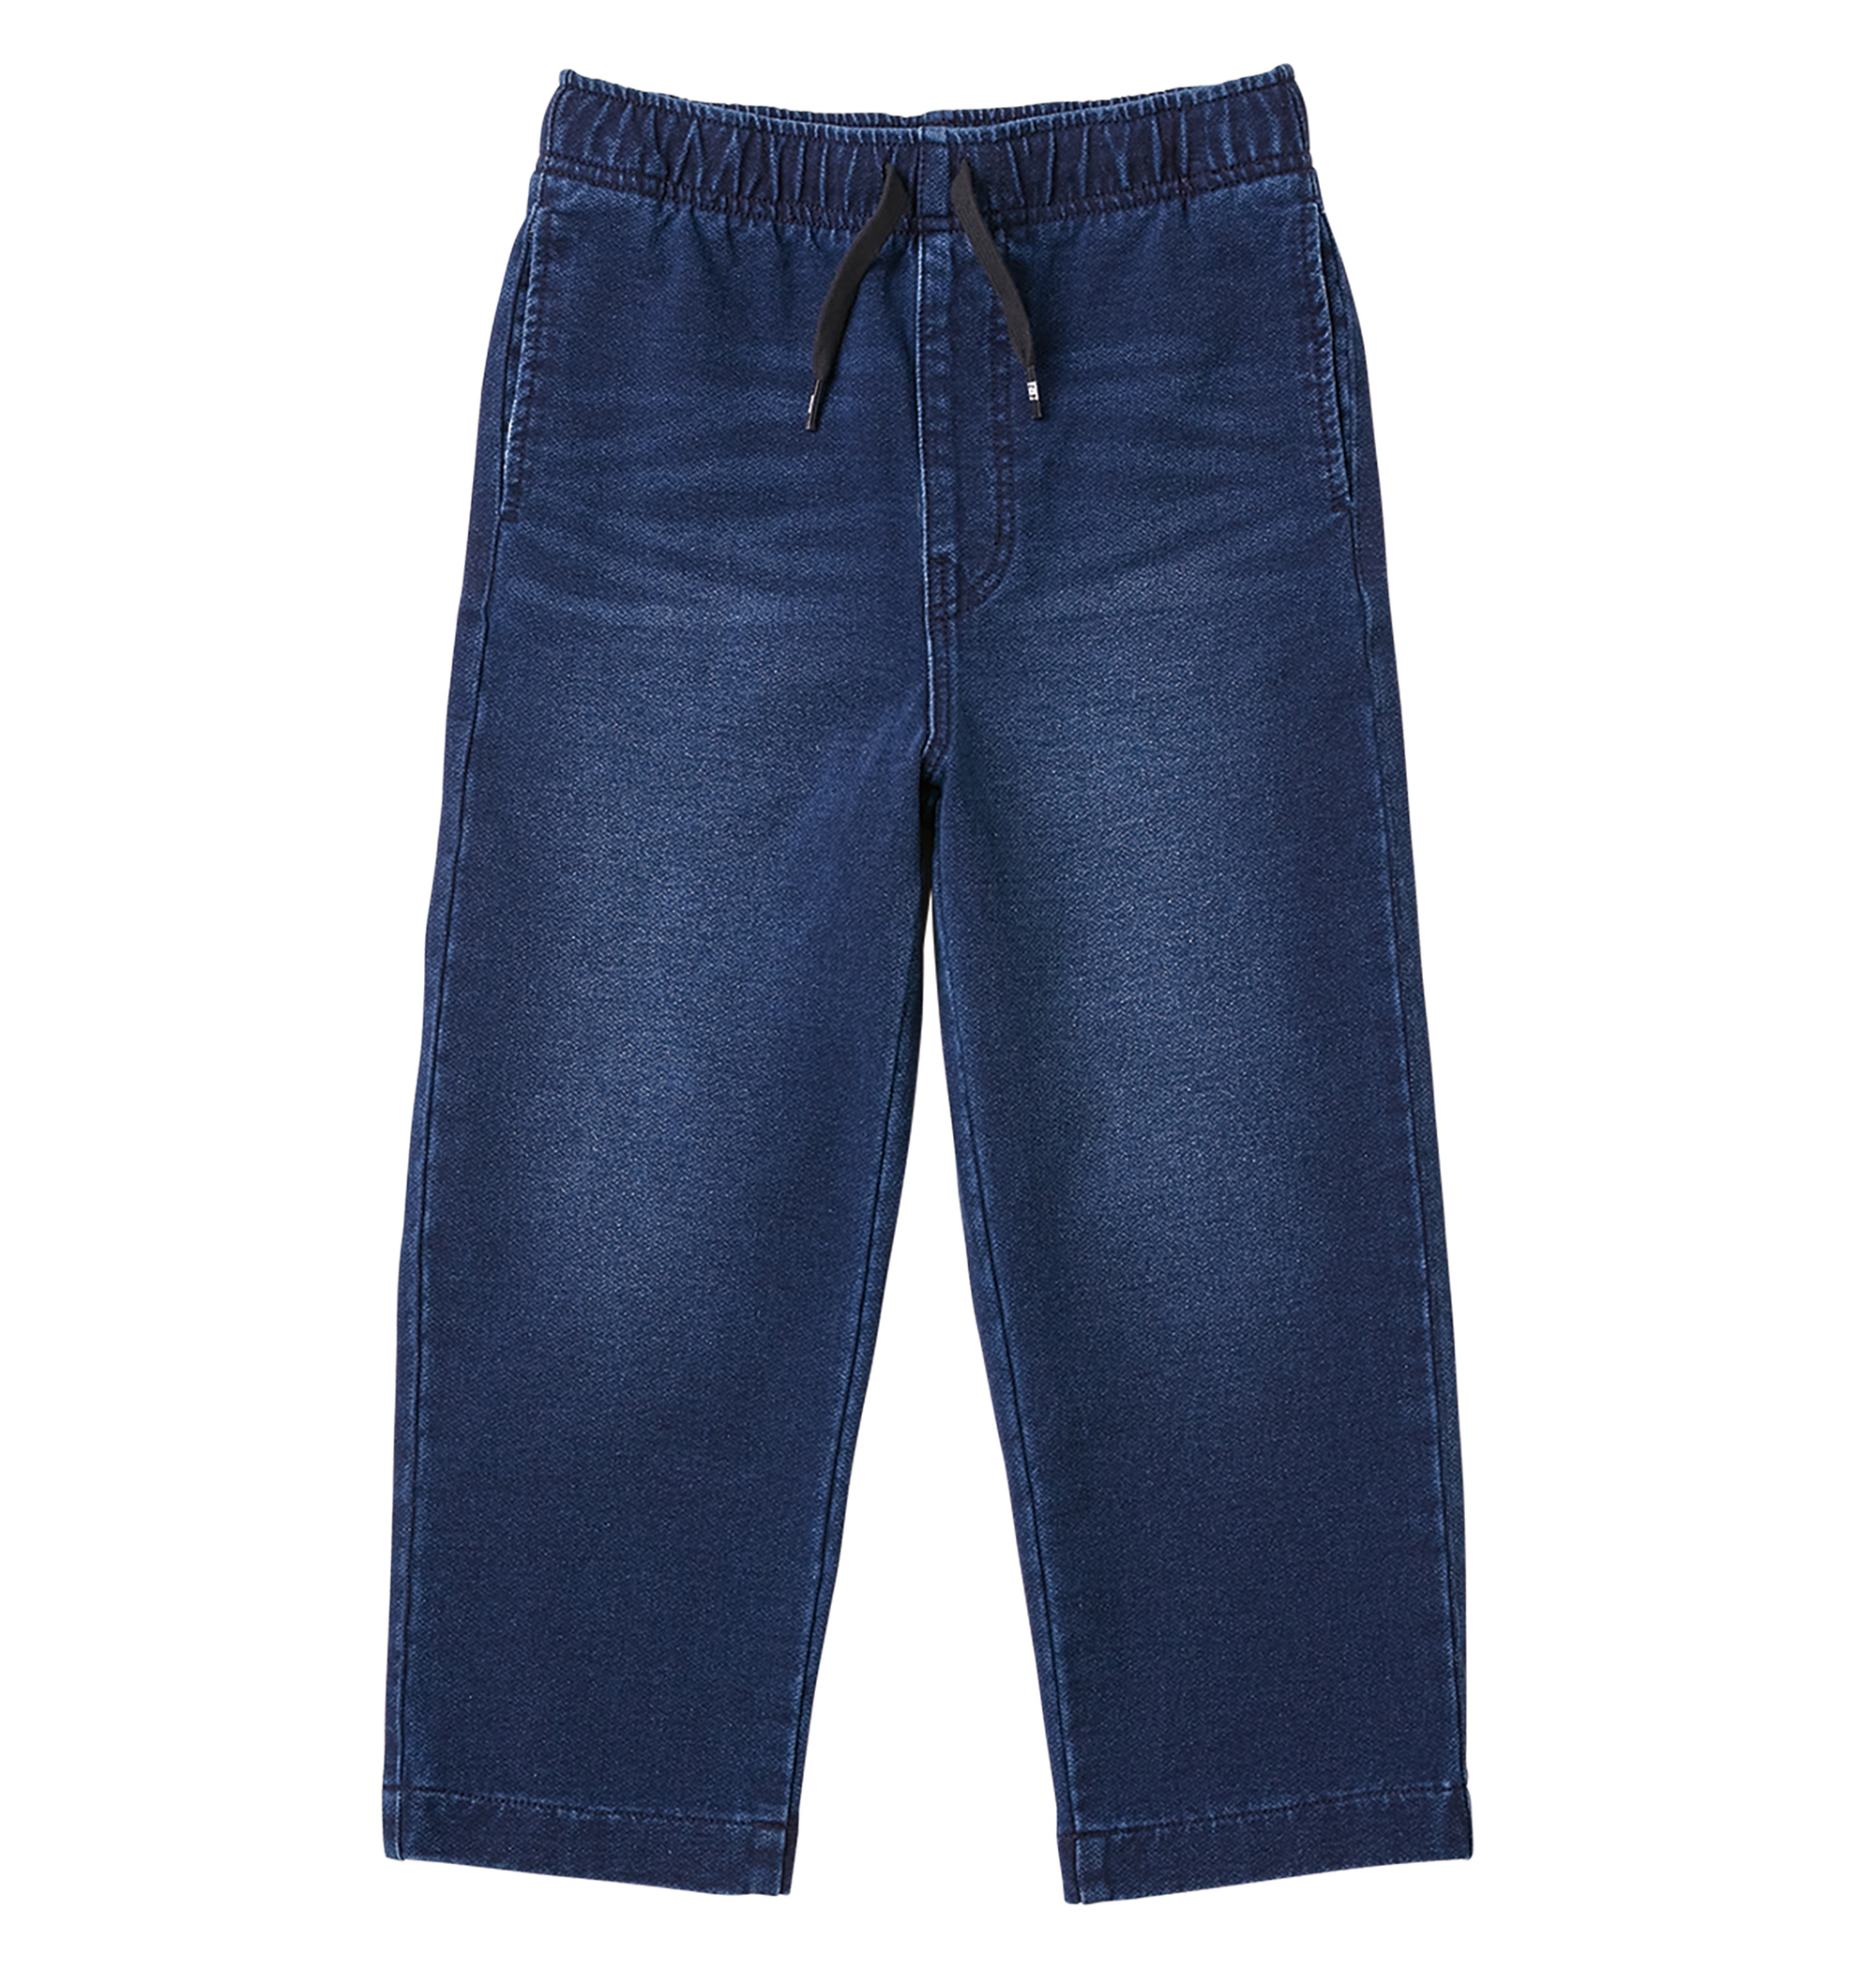 ＜DC Shoe＞ 21 KD WIDE TAPERED JERSEY PANT デイリーユースに活躍するテーパードパンツ画像